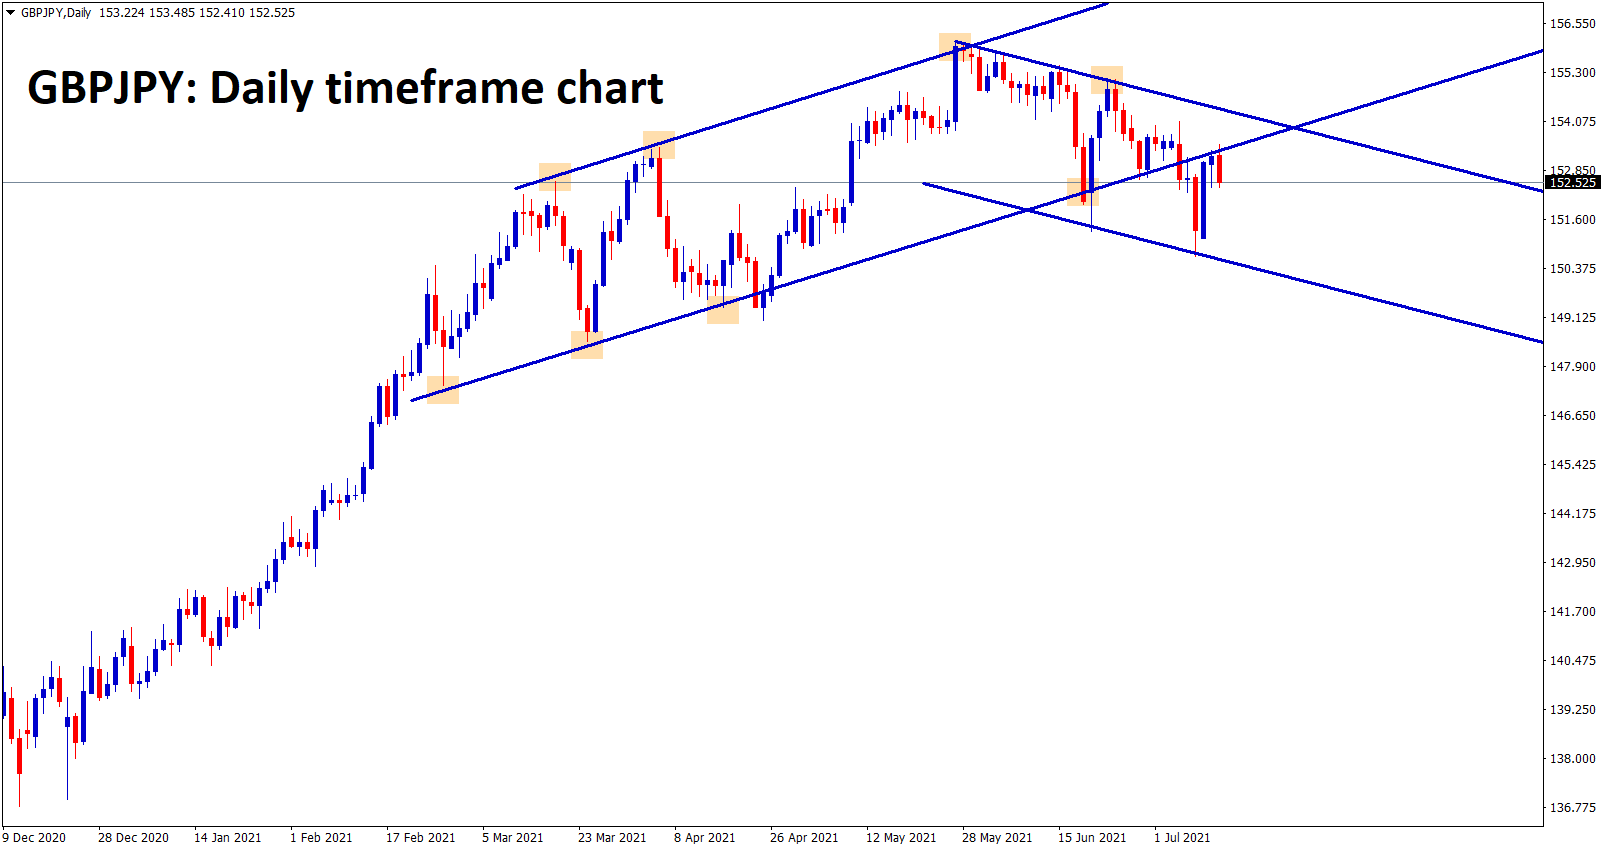 GBPJPY has retested the broken level of uptrend channel line